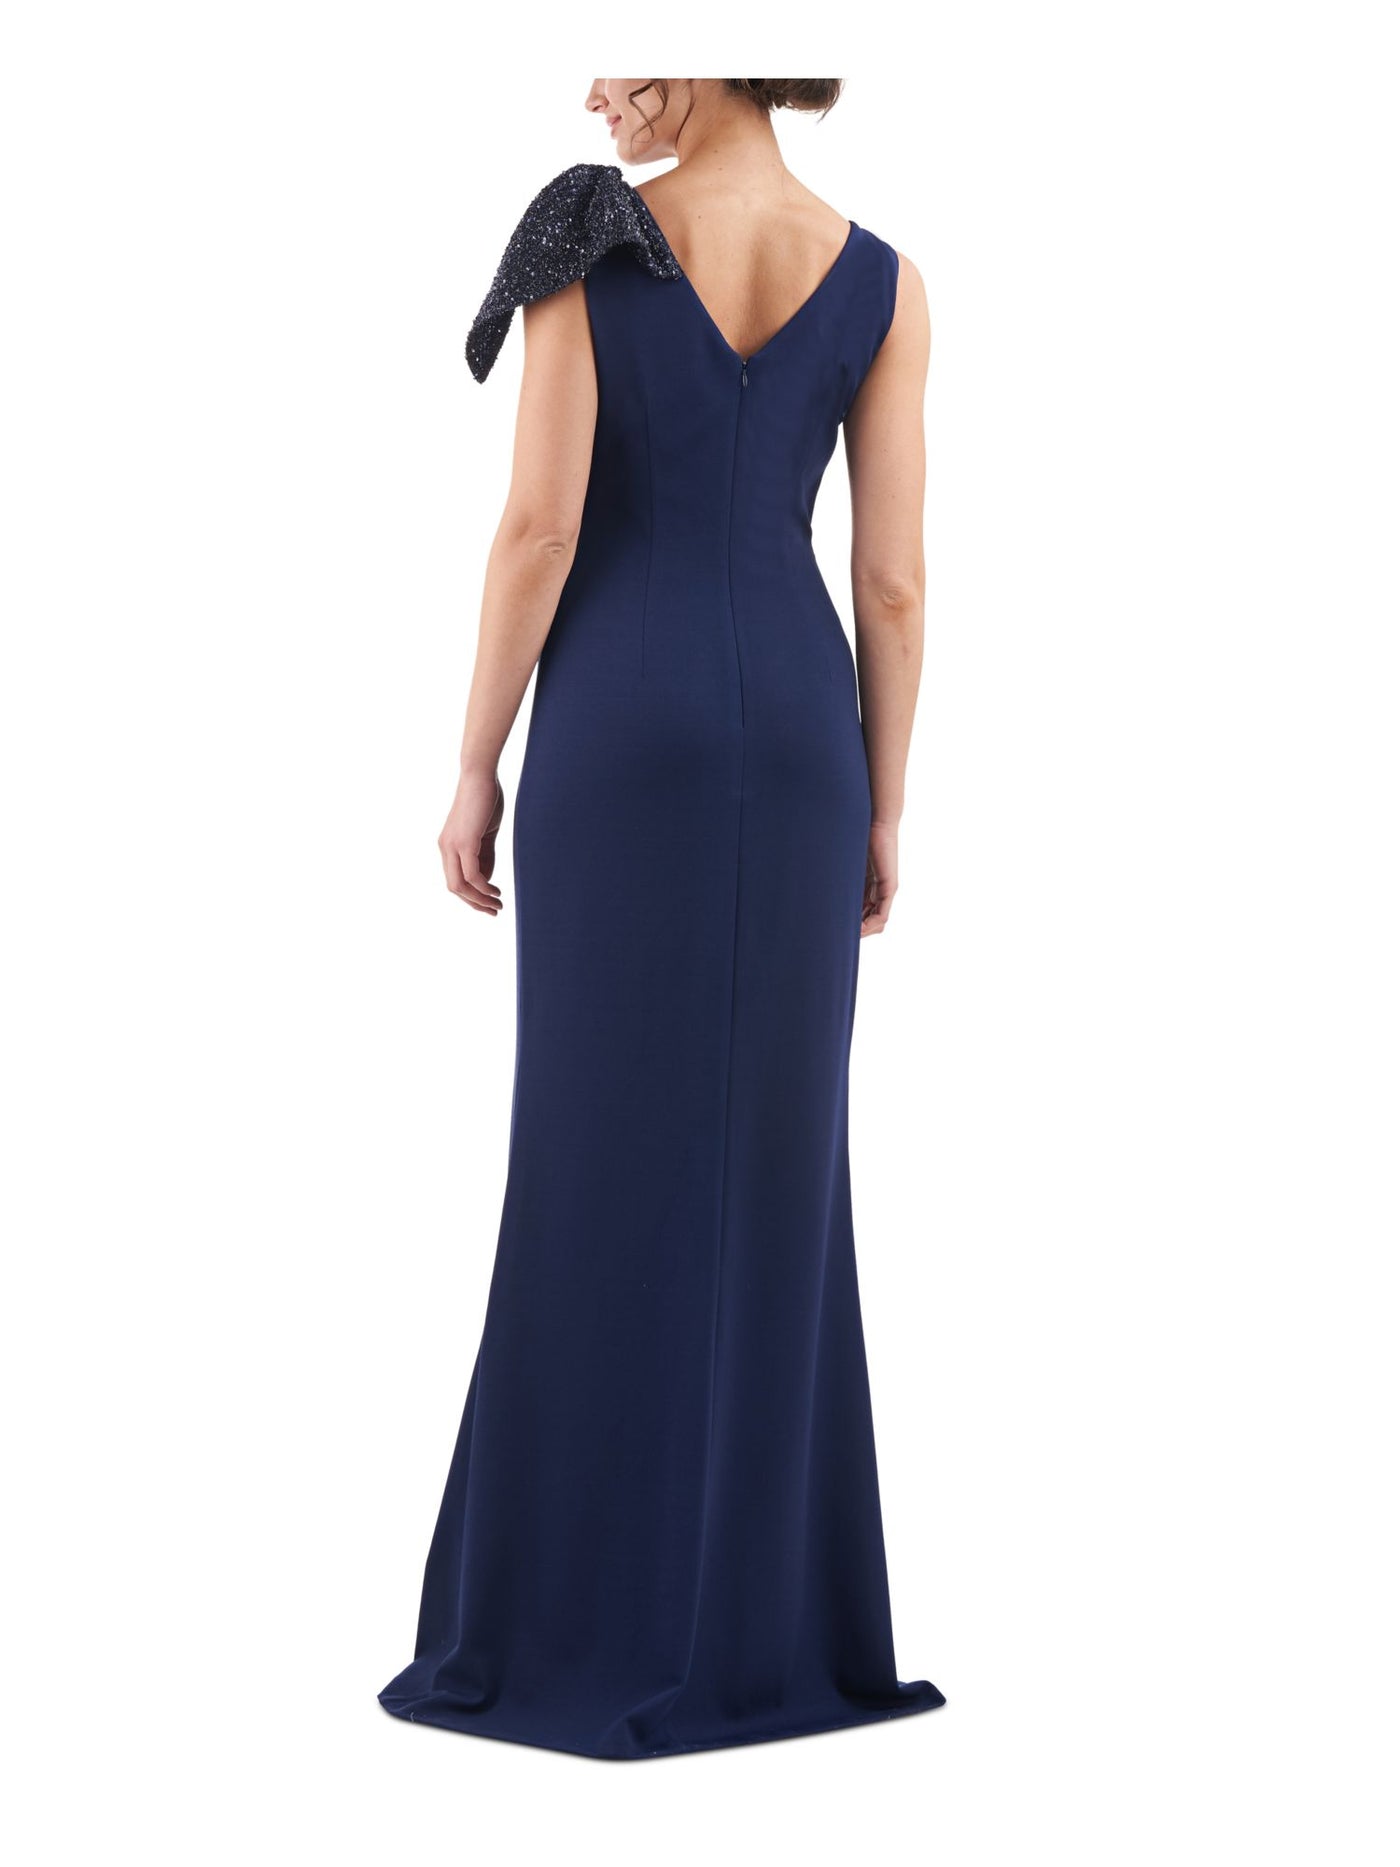 JS COLLECTIONS Womens Navy Sequined Zippered Sleeveless Round Neck Full-Length Cocktail Gown Dress 16